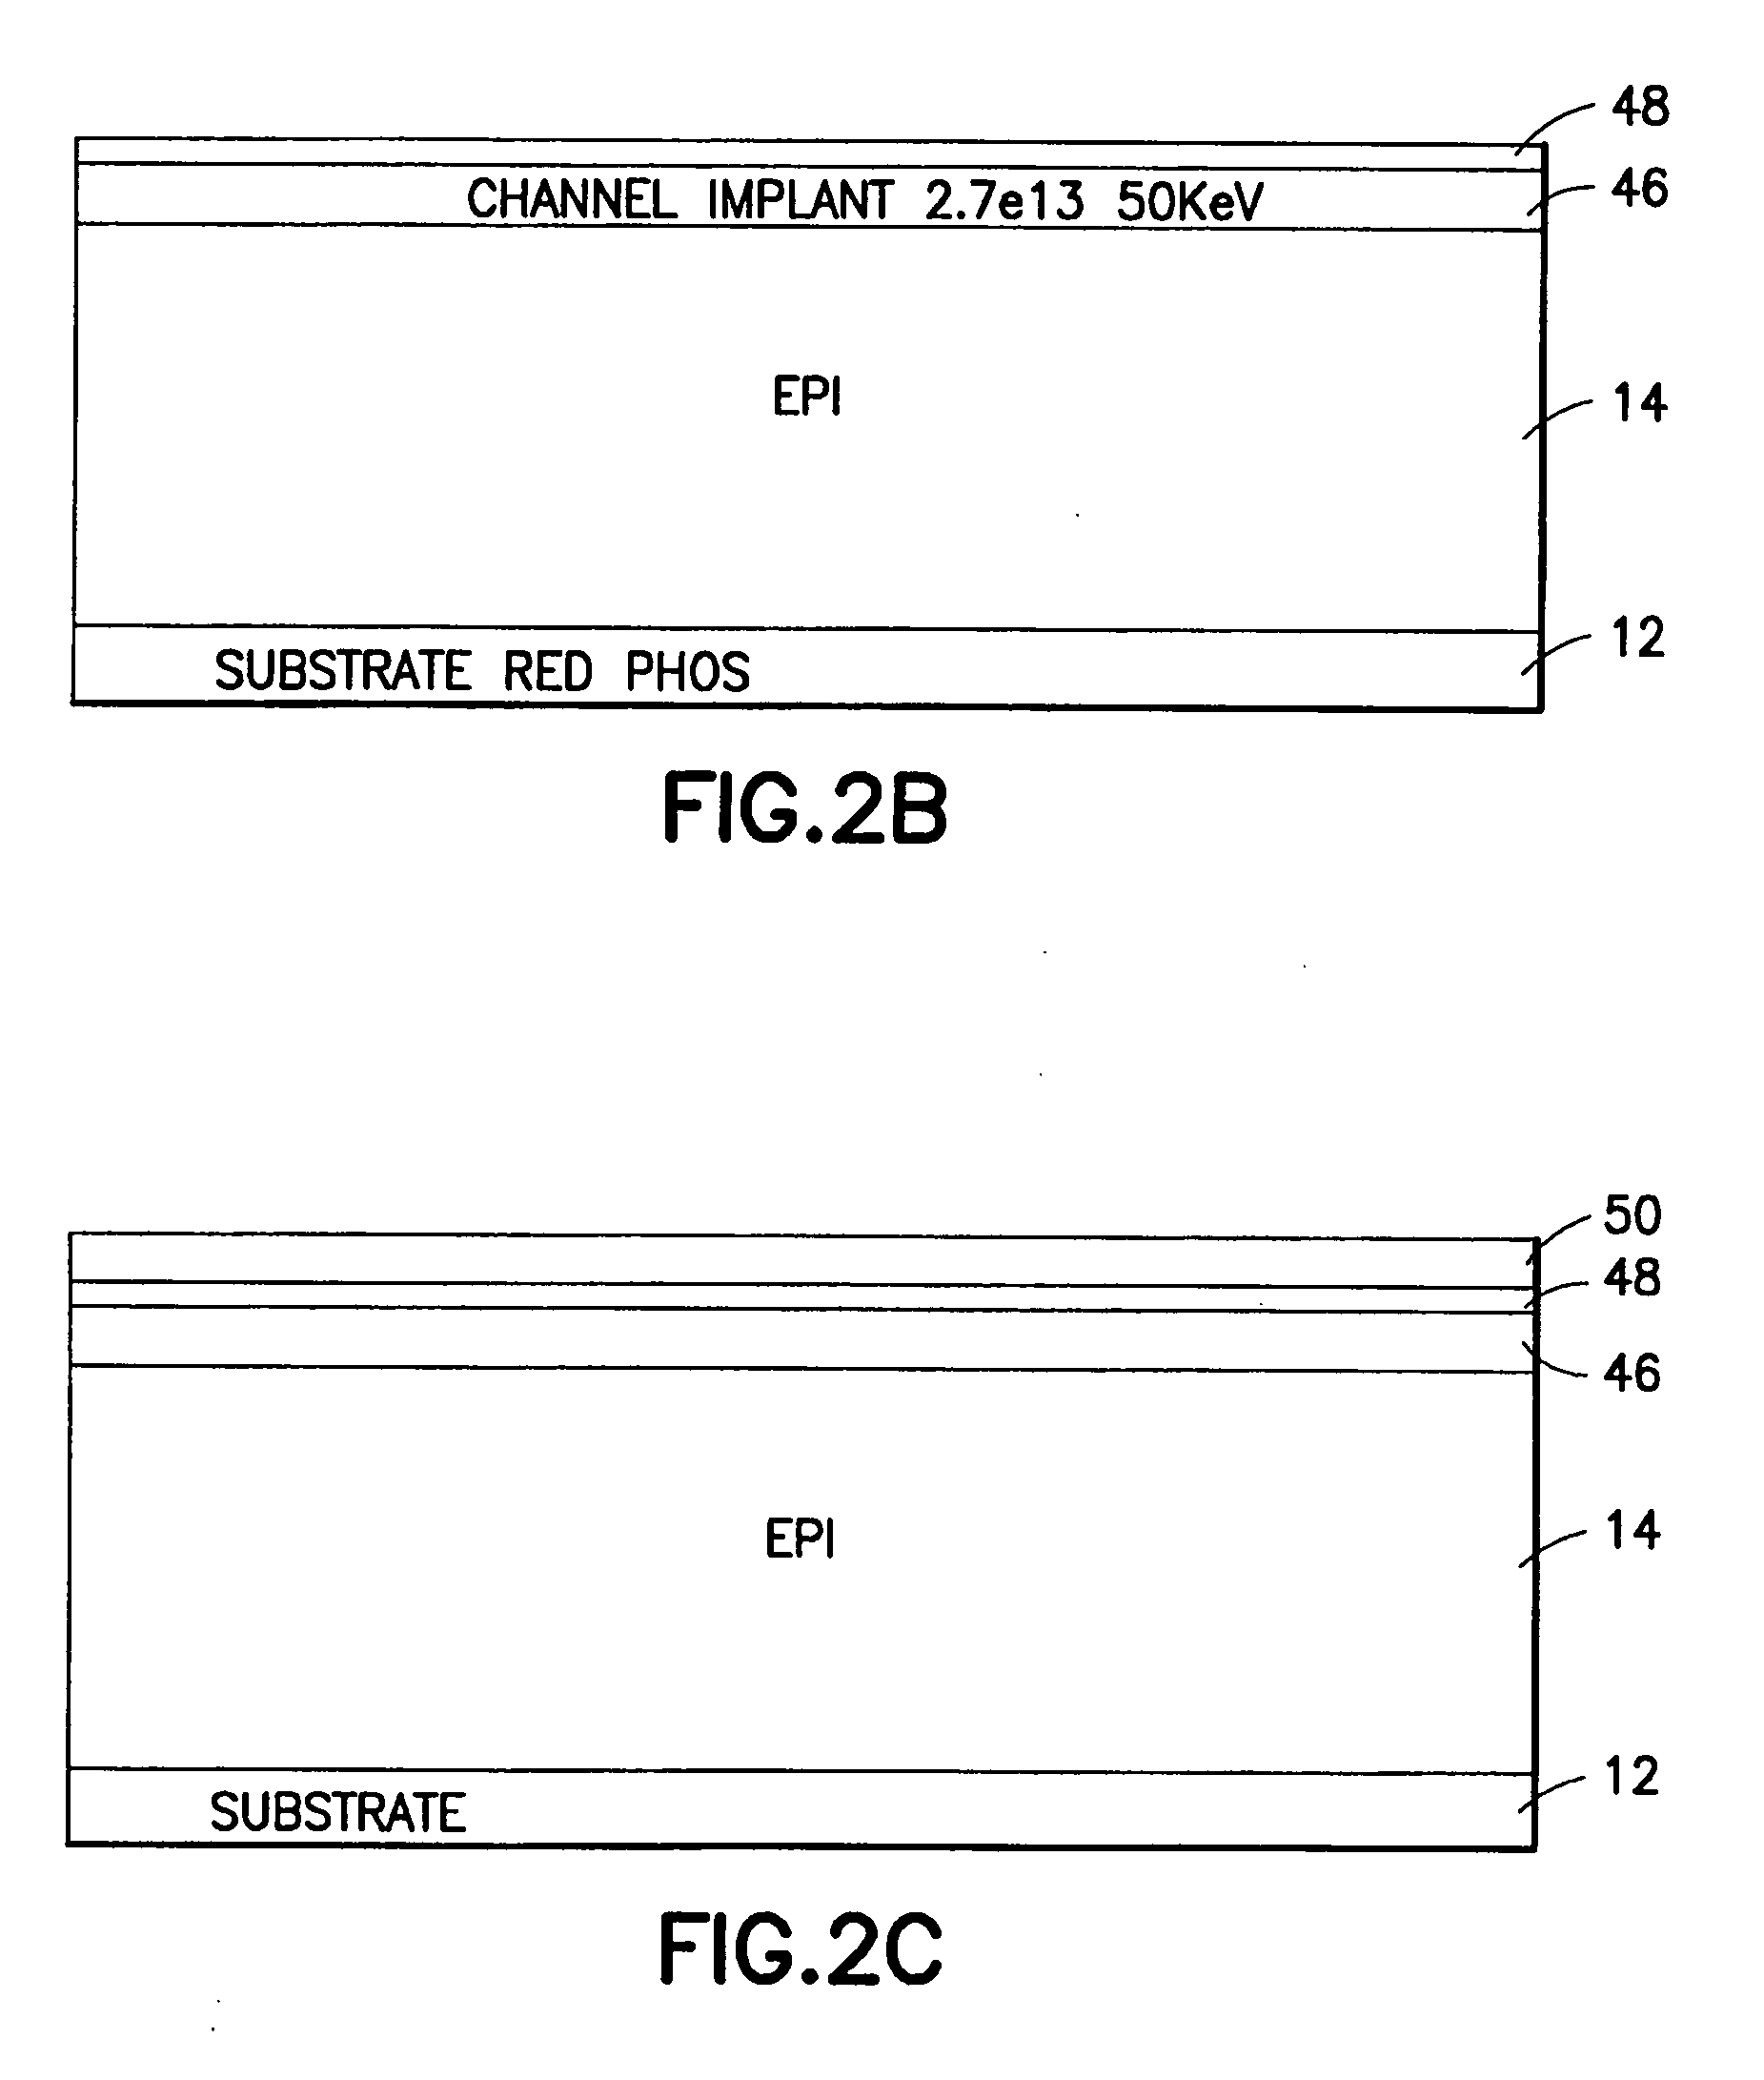 Trench MOSFET with deposited oxide